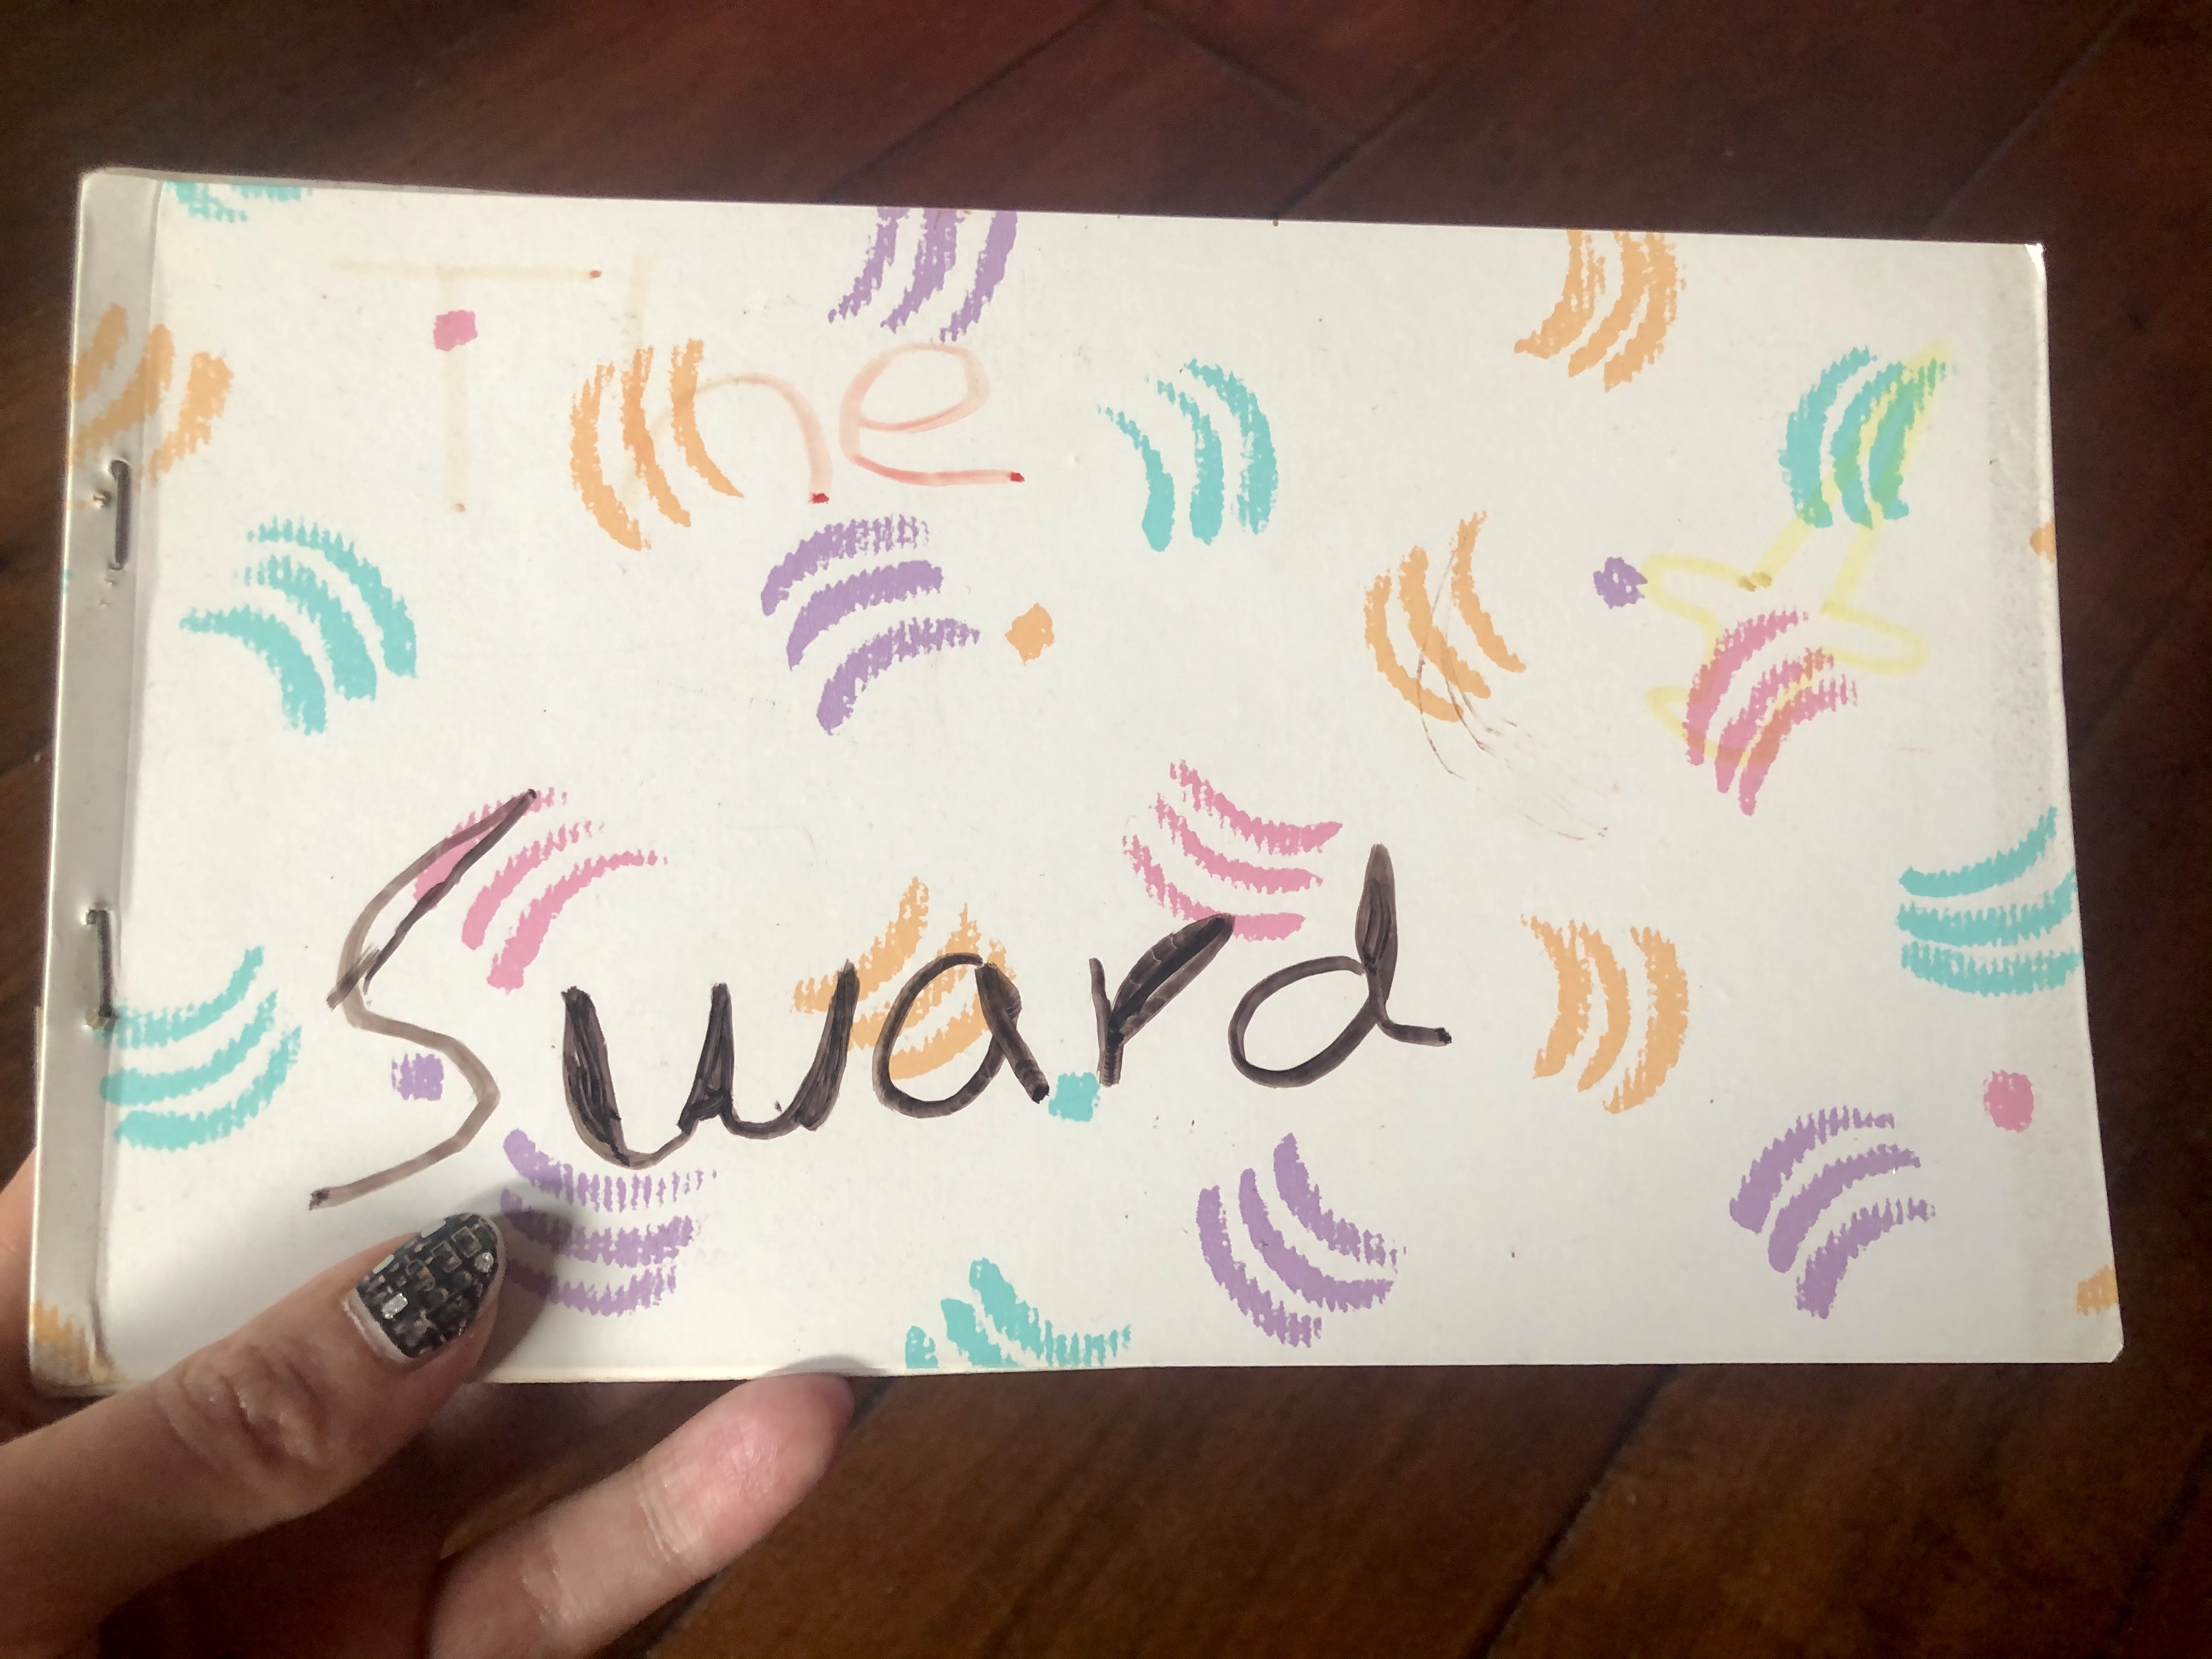 Hand-made book called
The Sward
